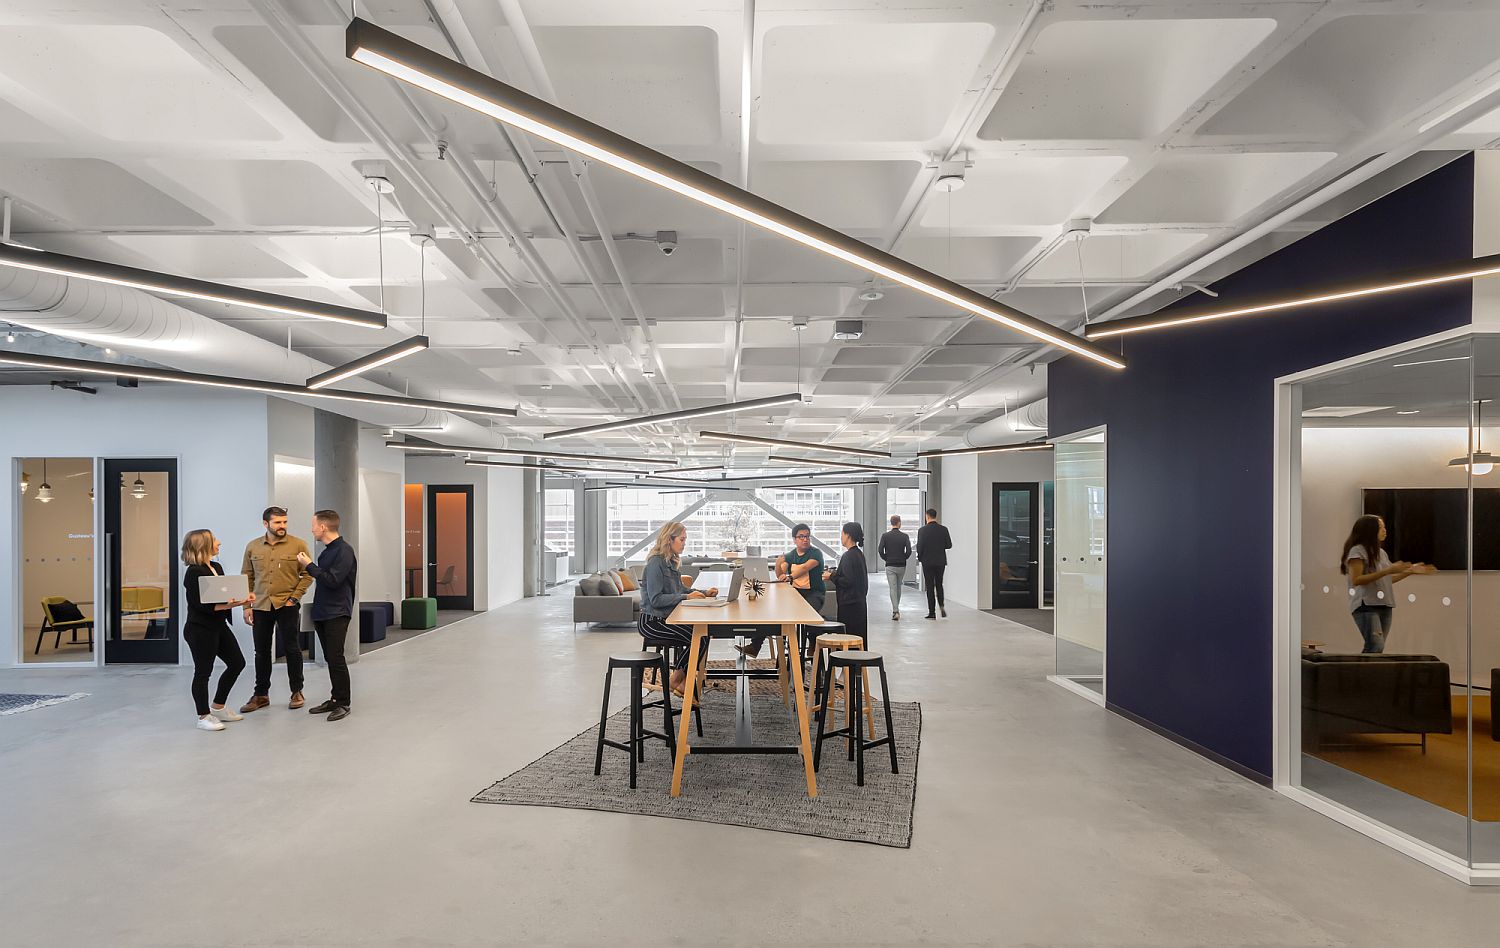 Minimal and uncomplicated aesthetics of the Patreon Office by Gensler